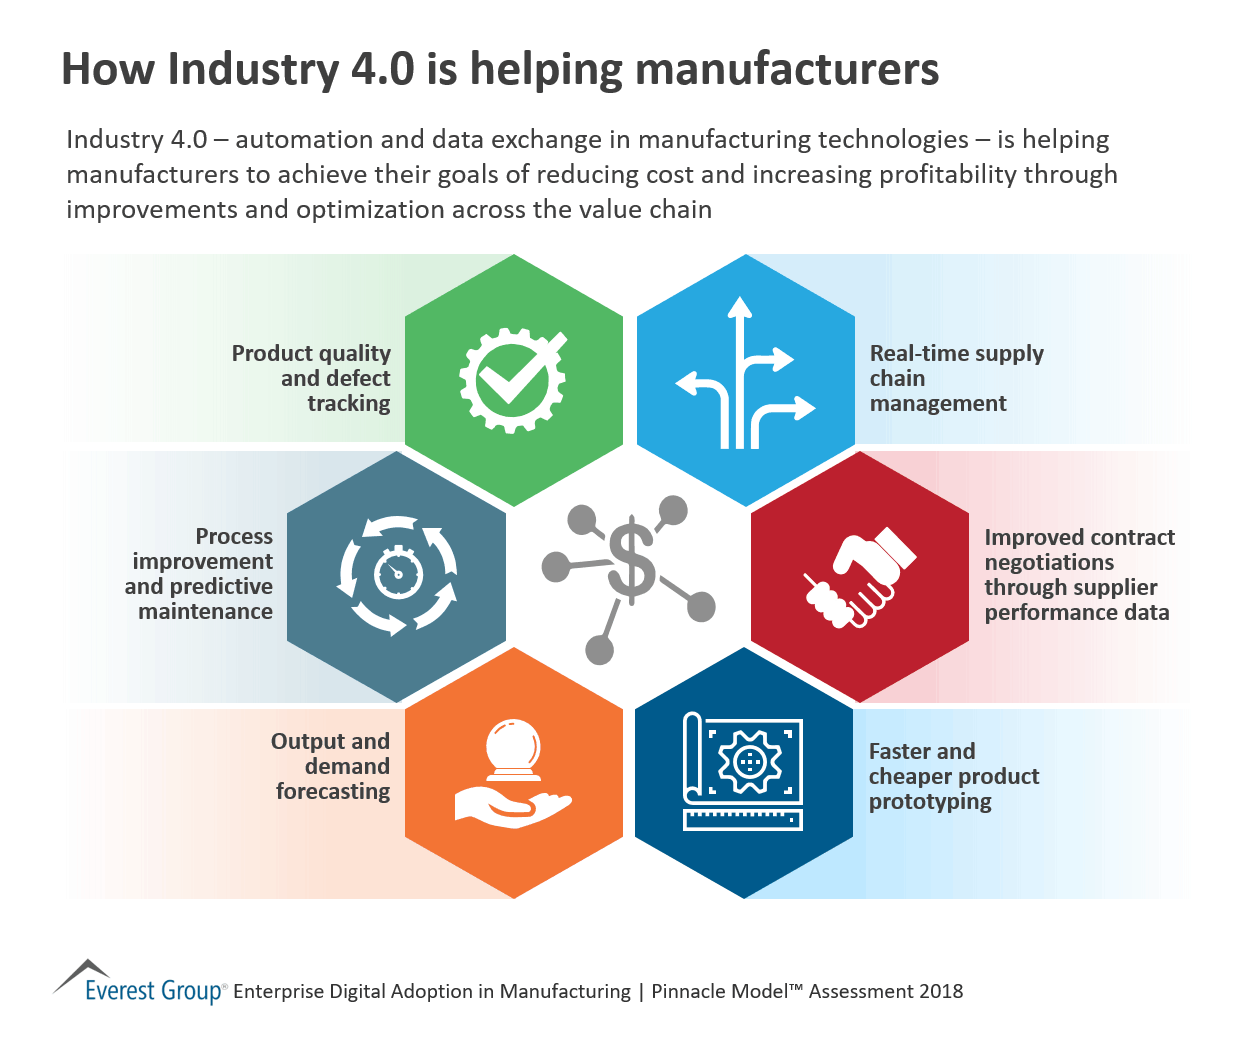 How Industry 4.0 is helping manufacturers